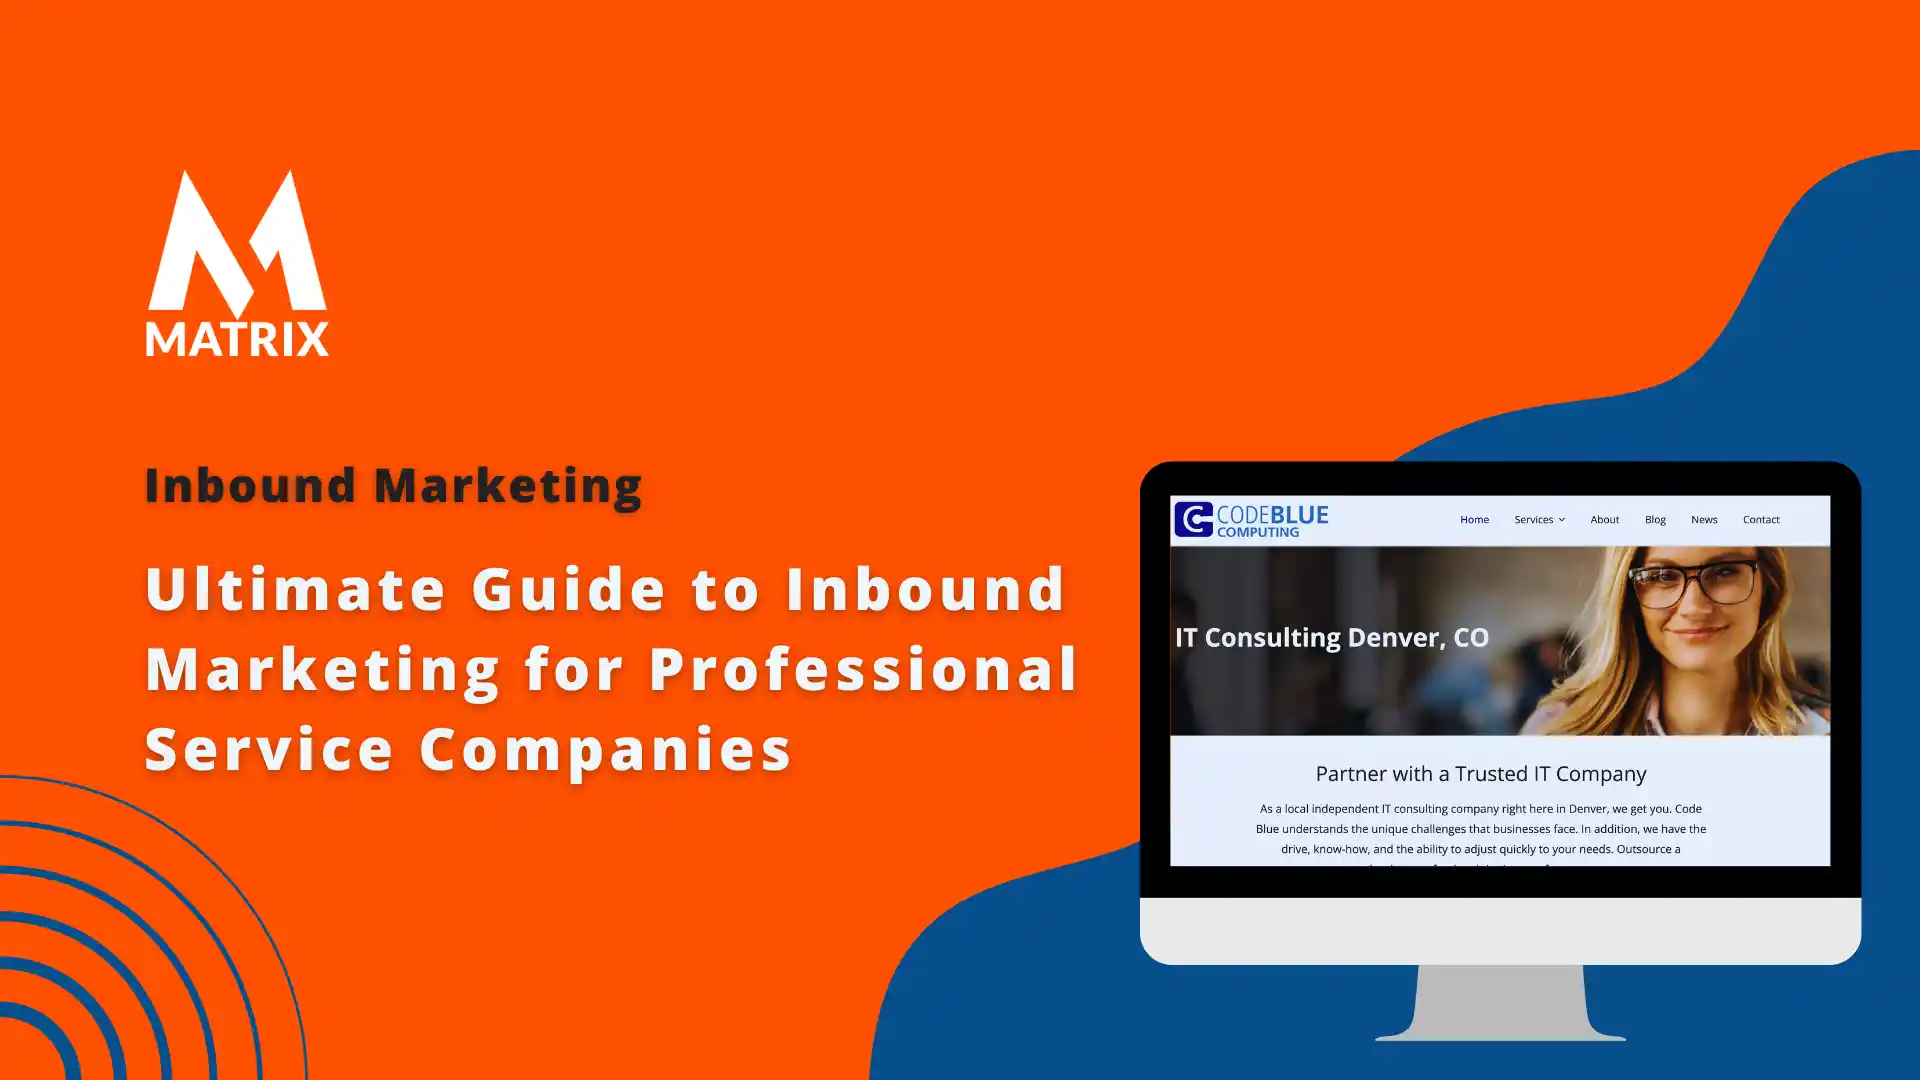 Inbound Marketing for Professional Service Companies